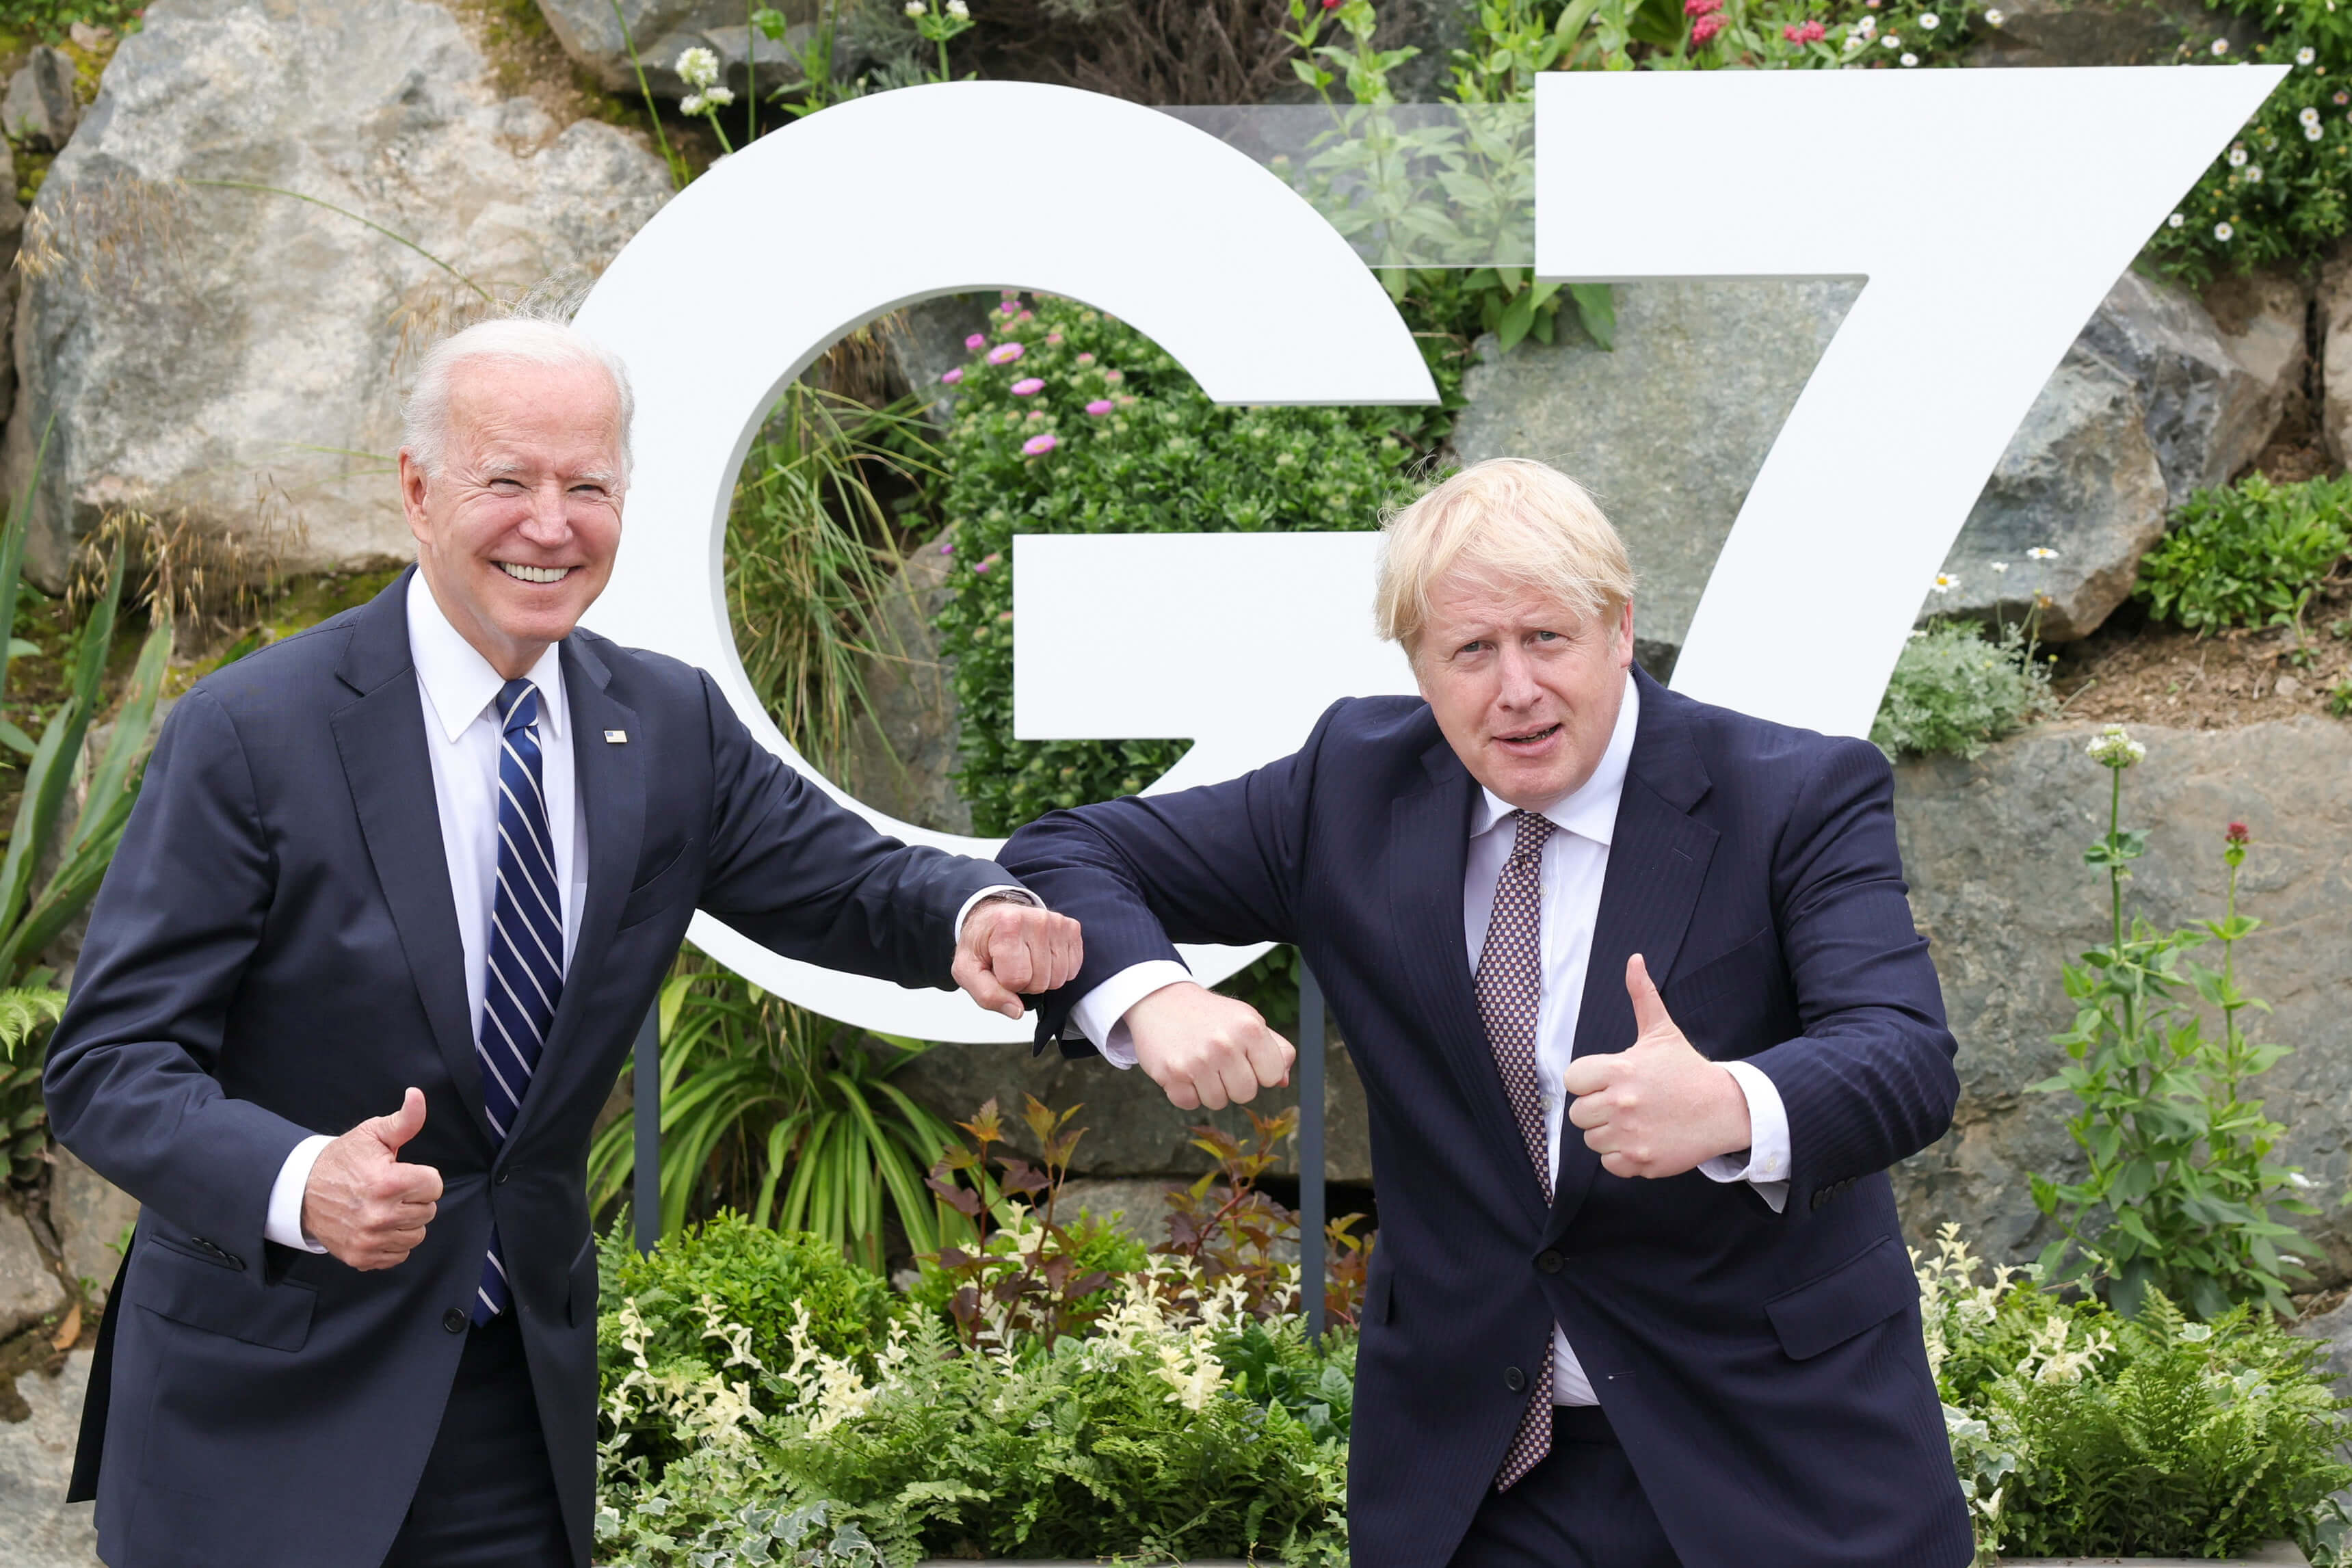 The President of the United States, Joe Biden stands next to the The Prime Minister, Boris Johnson at the G7 Leaders’ Summit in Cornwall in June 2021. Number 10 - Flickr